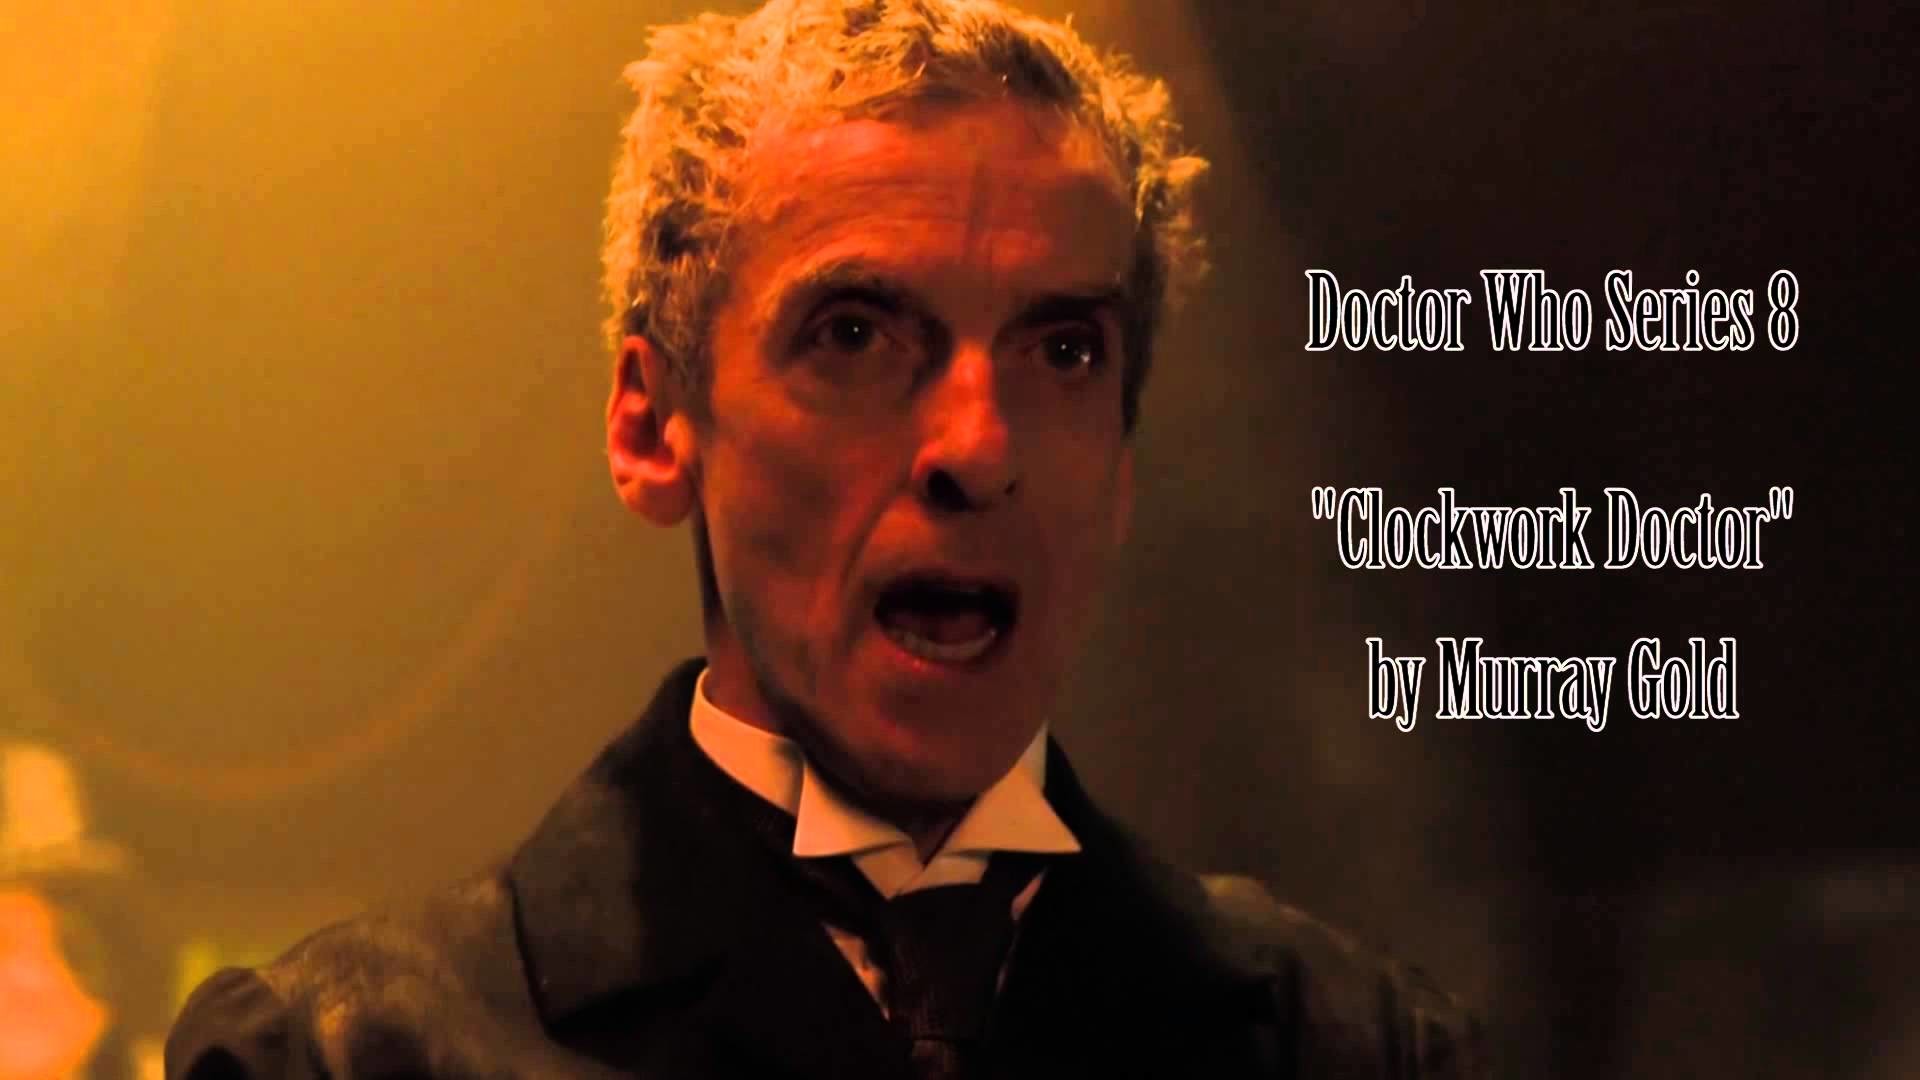 1920x1080 12th Doctor's Theme - "CLOCKWORK DOCTOR" - Murray Gold